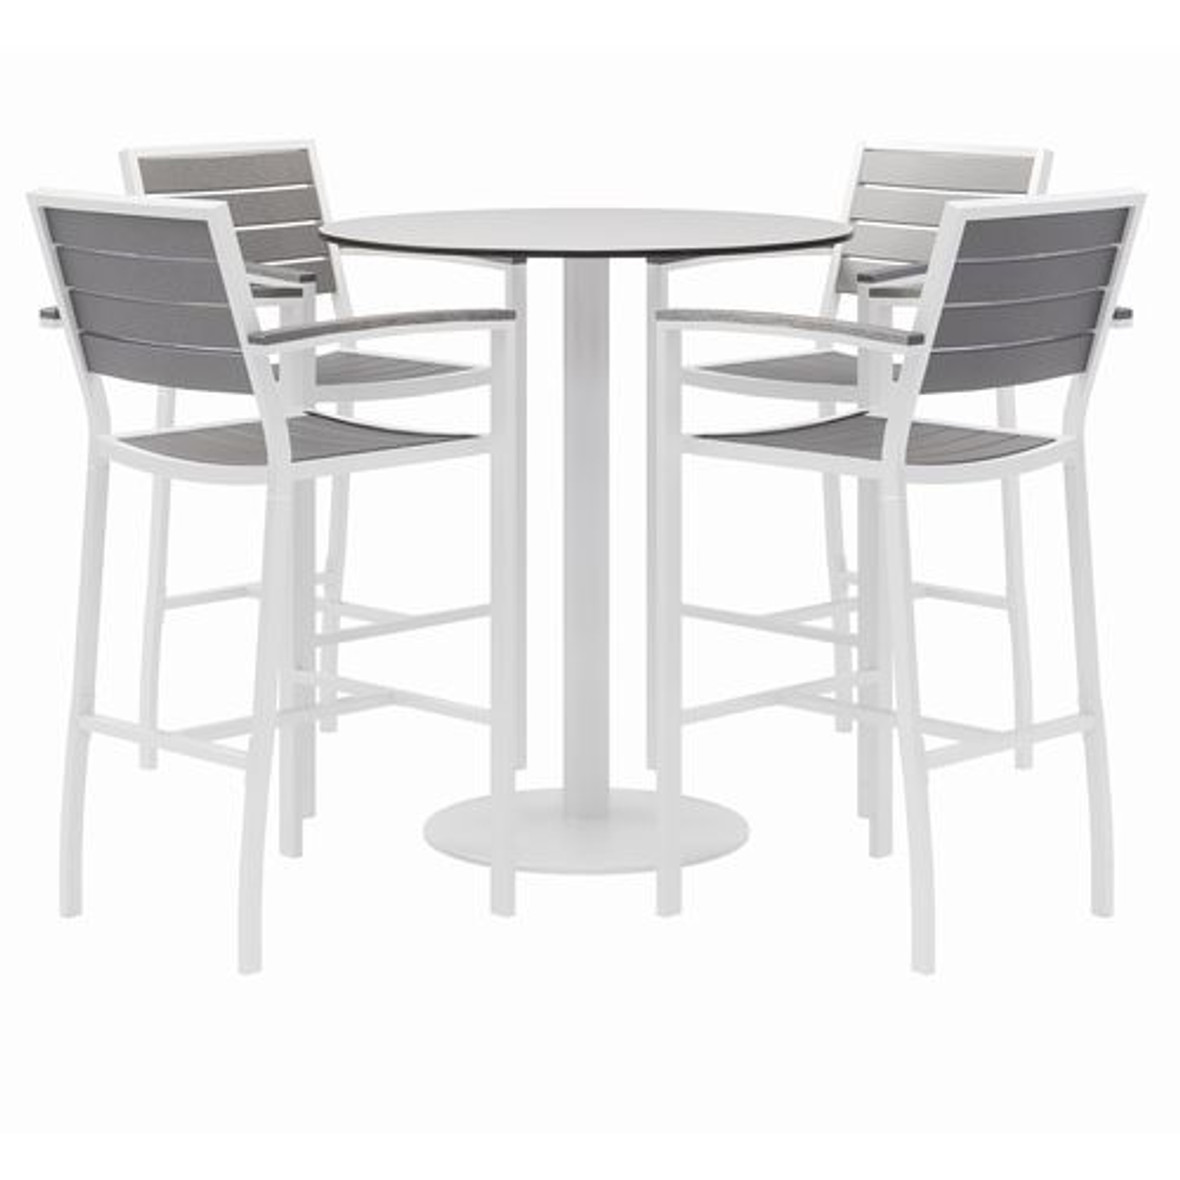 KFI Studios Eveleen Outdoor Bistro Patio Table W/ Four Gray Powder-coated Polymer Barstools, Round, 41"h, White, Ships In 4-6 Bus Days